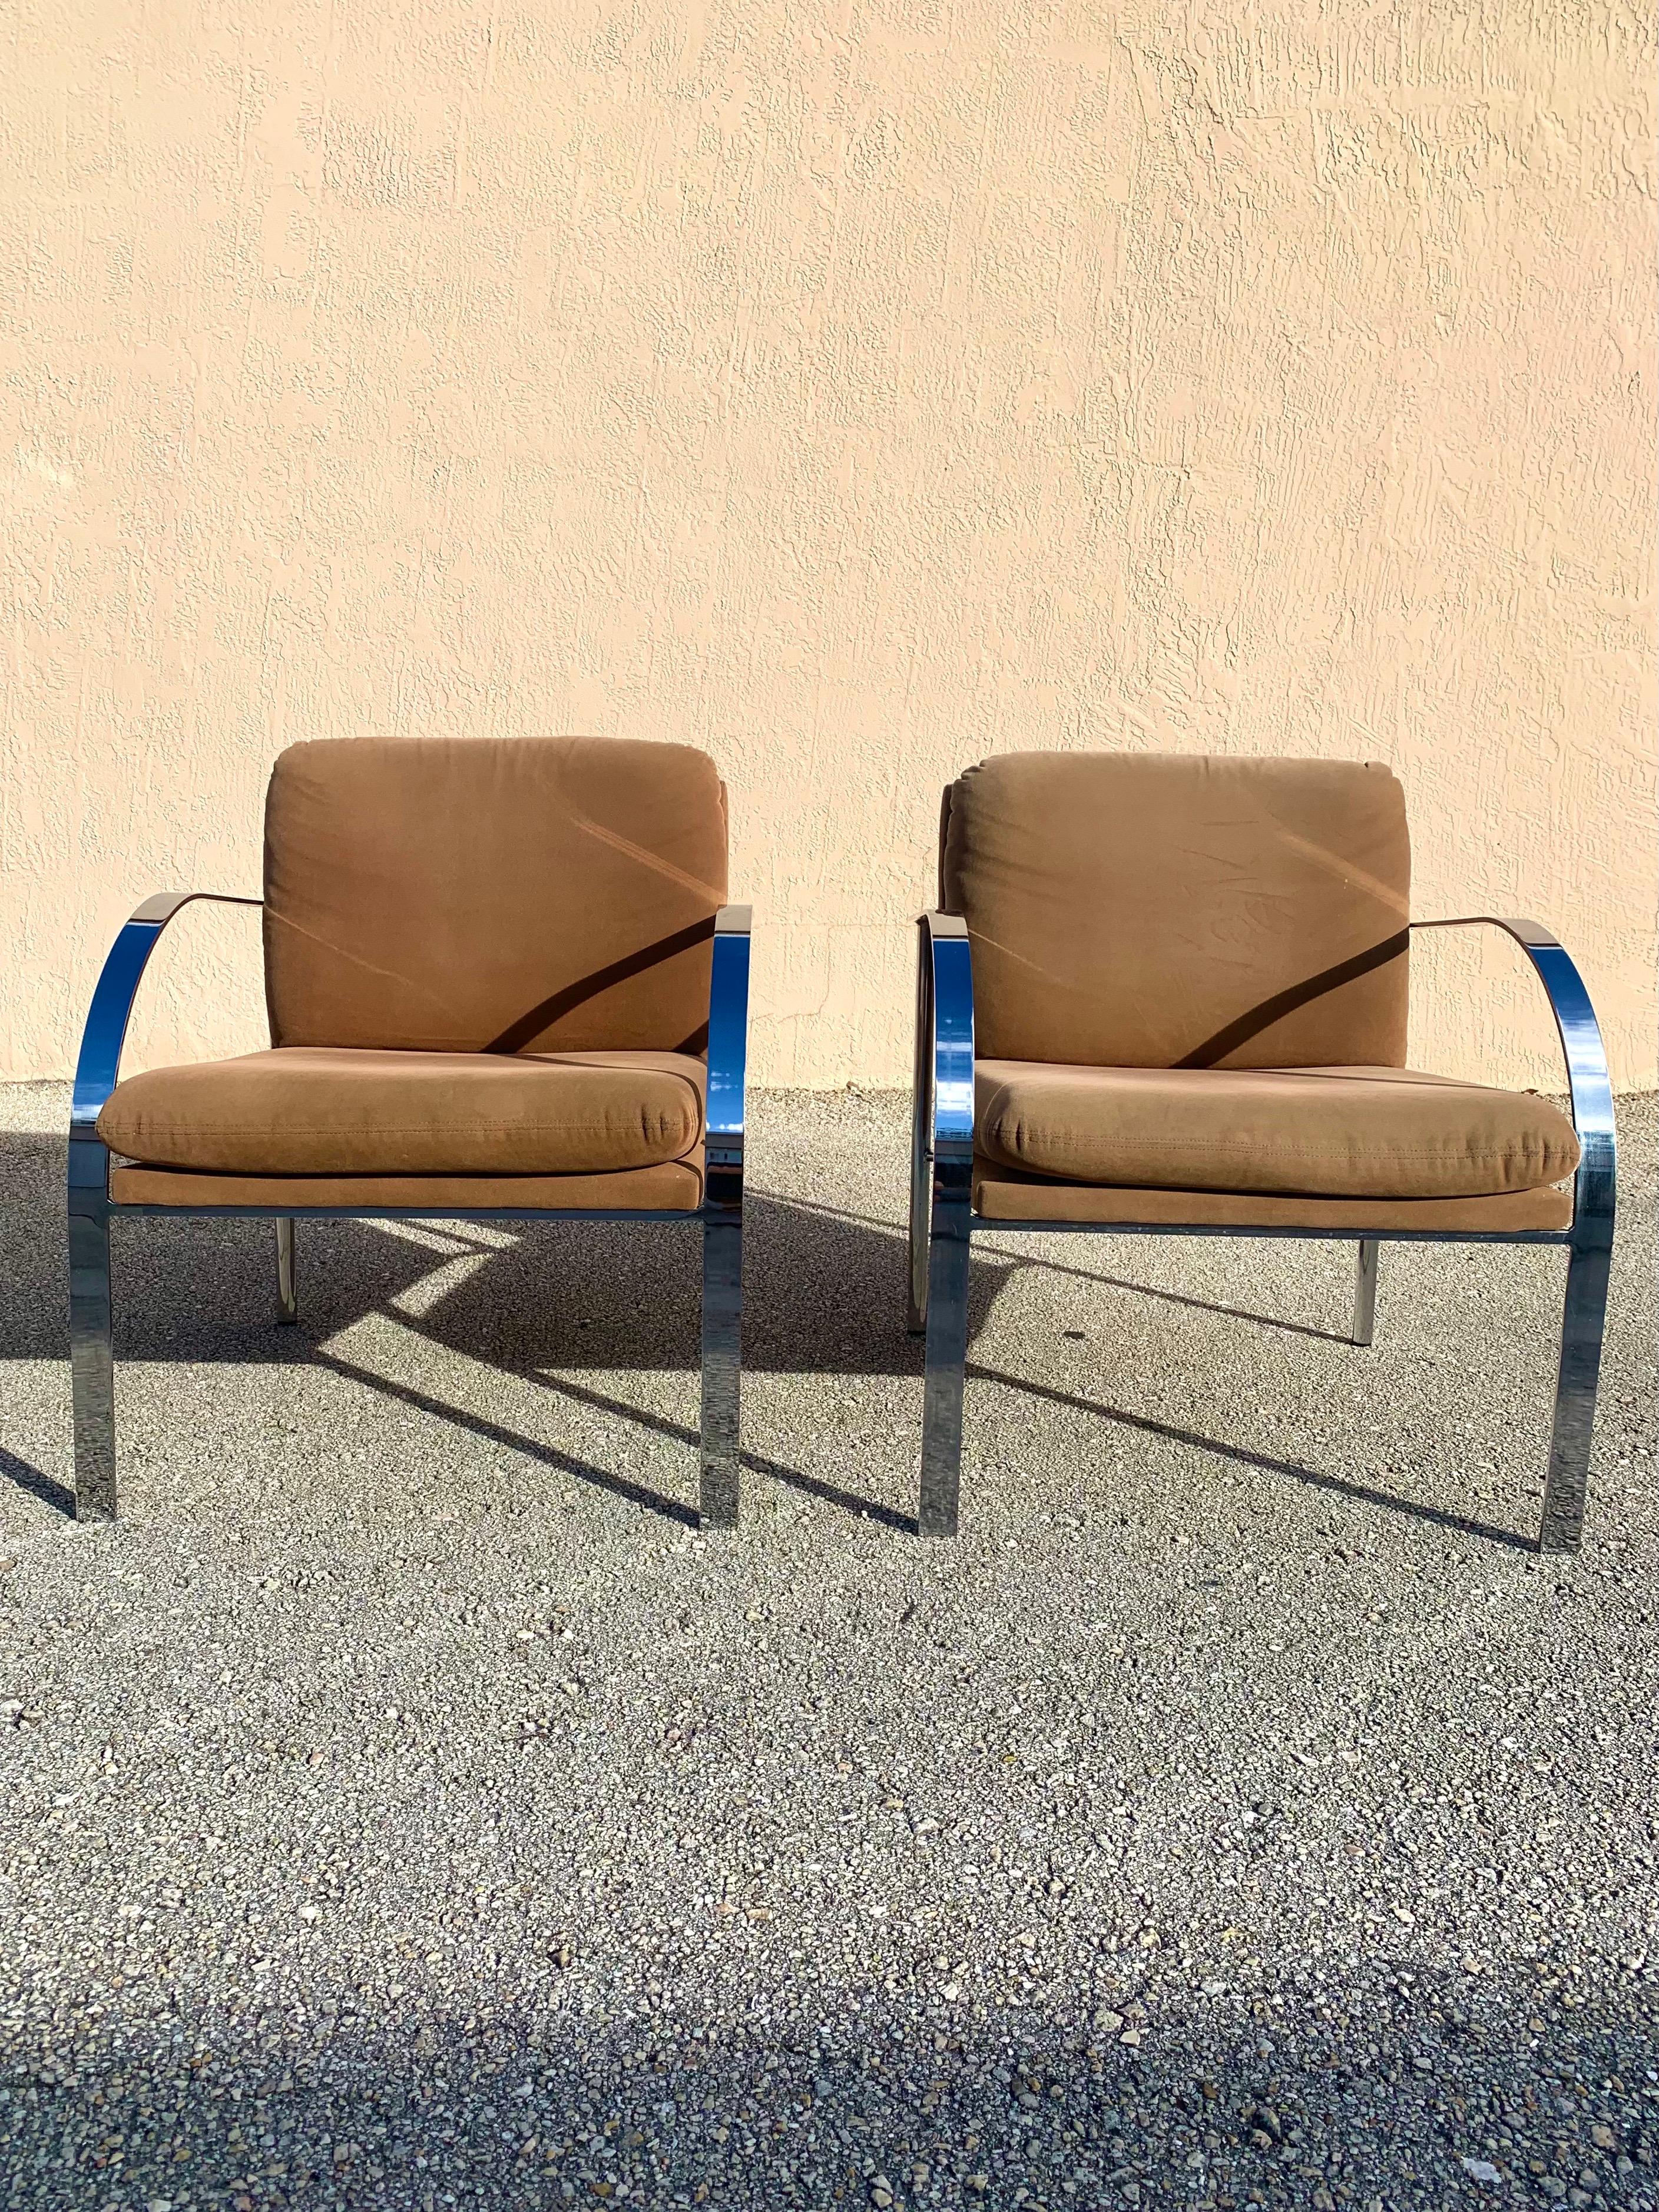 Unknown 1980s Milo Baughman Style Mid-Century Modern Flat Bar Chrome Lounge Chairs For Sale